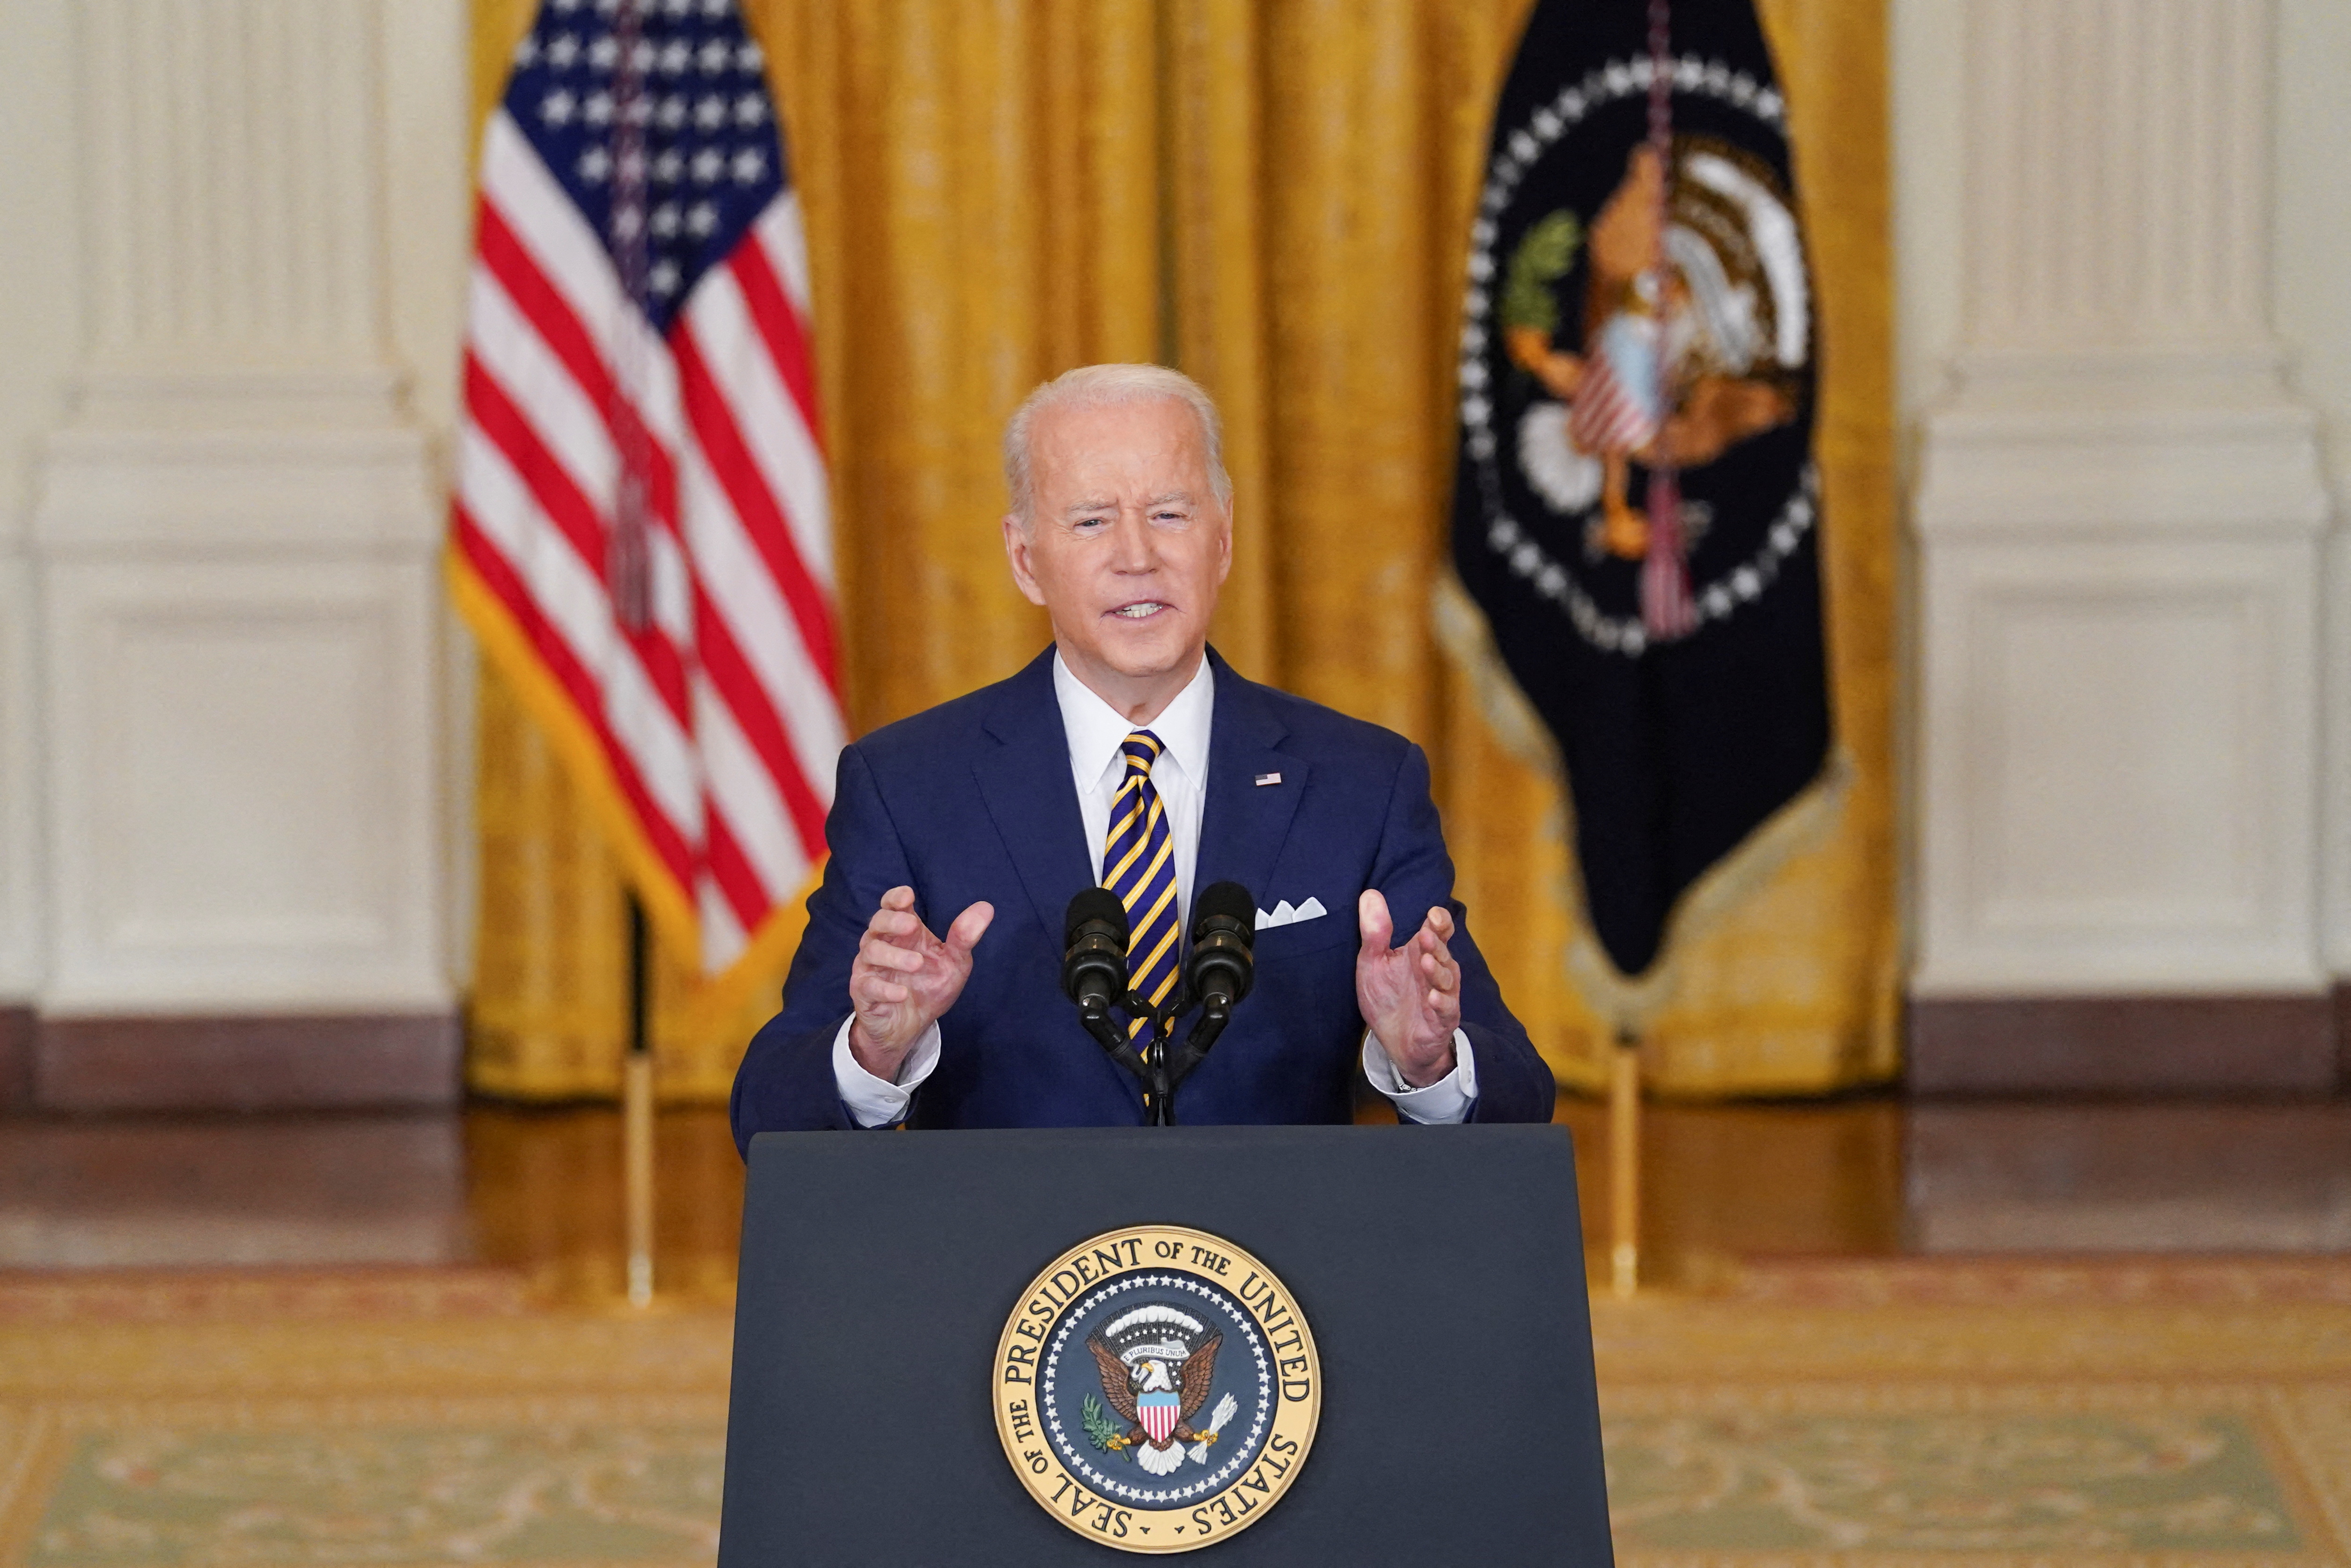 U.S. President Joe Biden holds a formal news conference at the White House